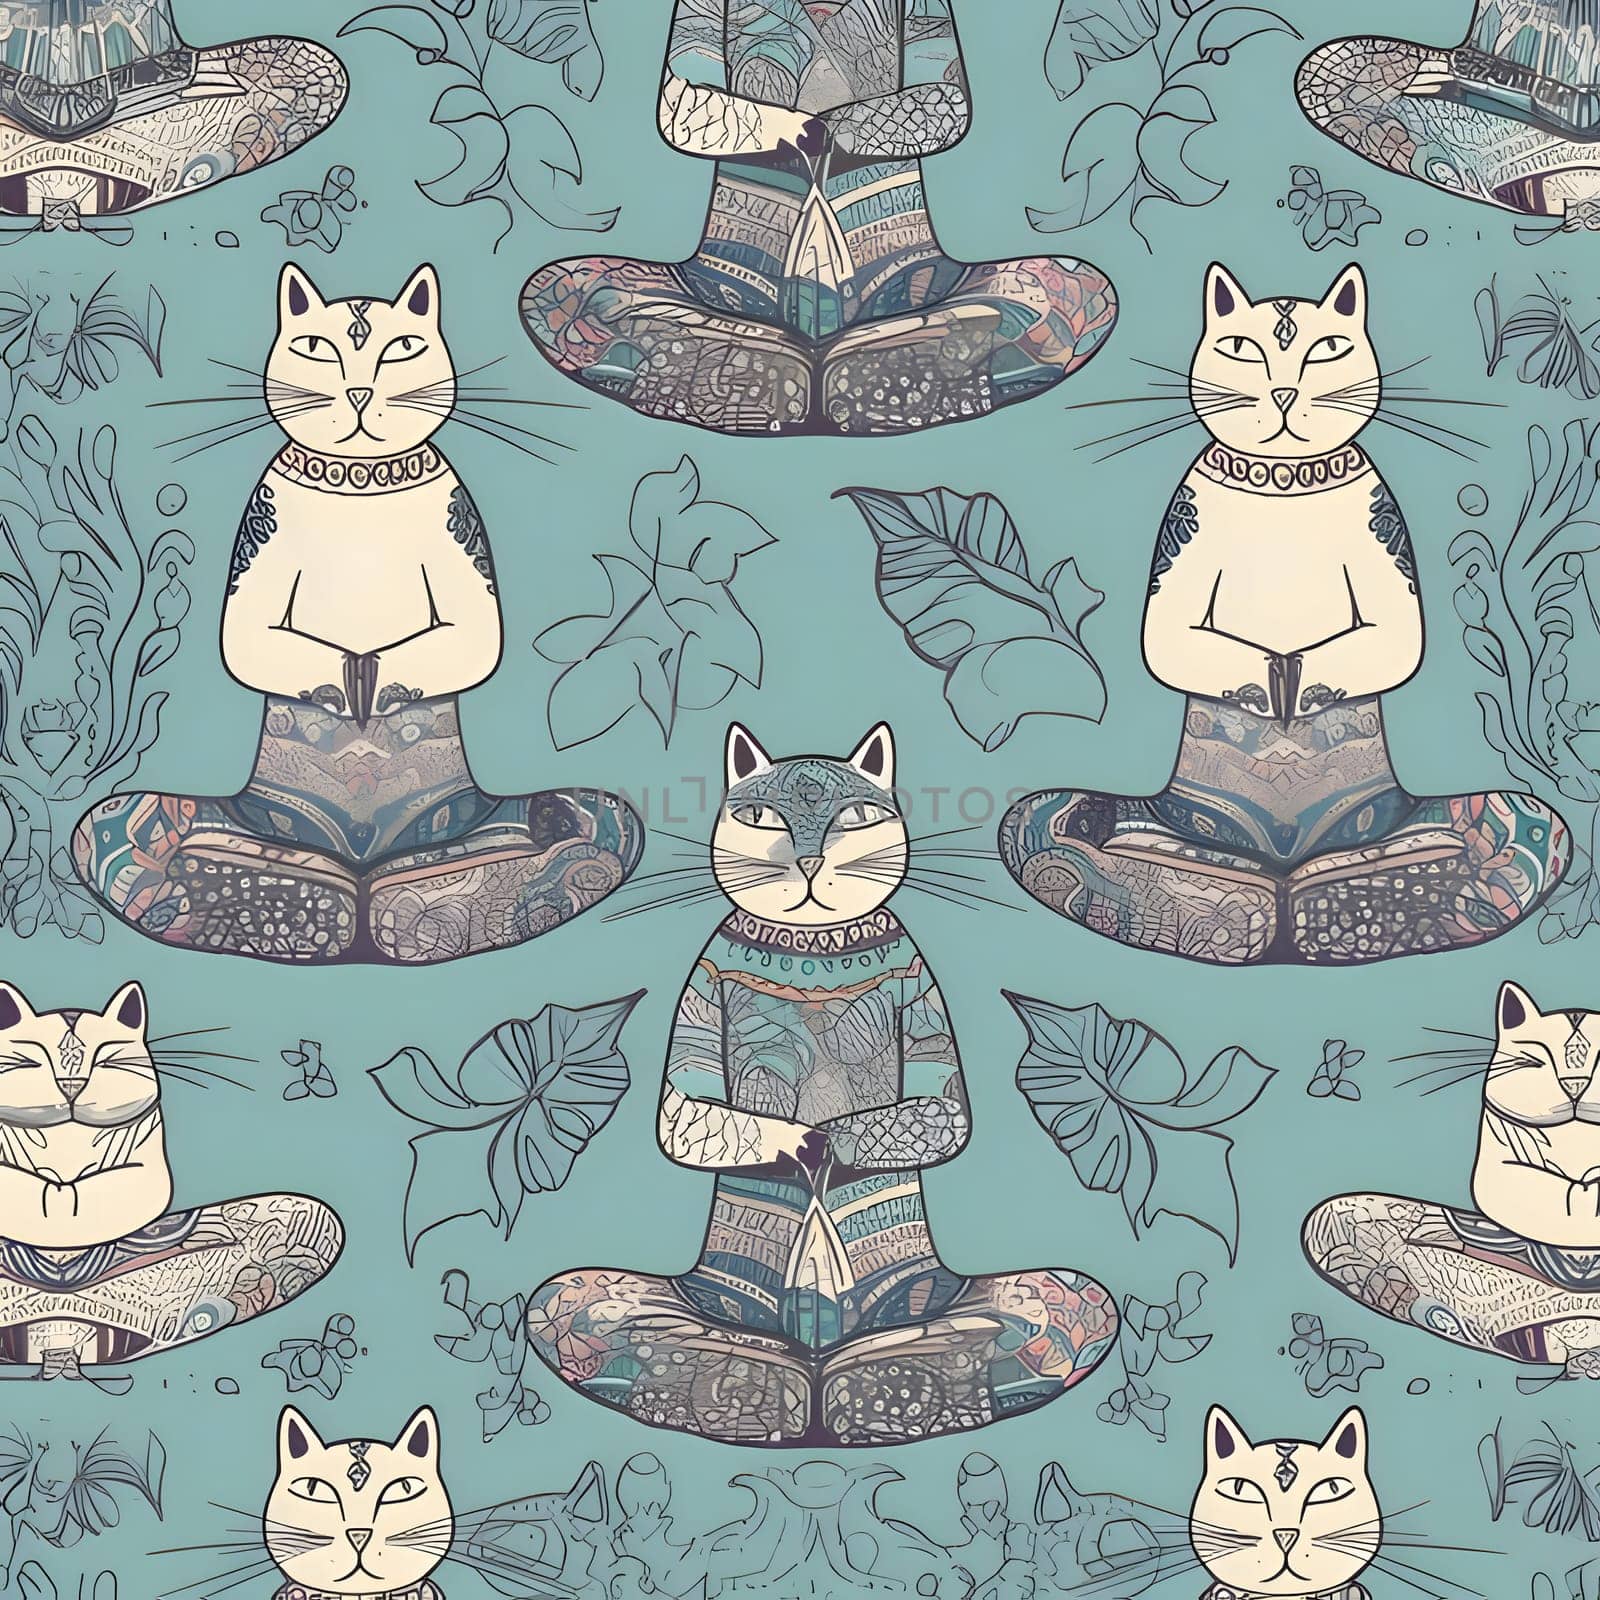 Patterns and banners backgrounds: Seamless pattern with cats and plants. Hand-drawn illustration.